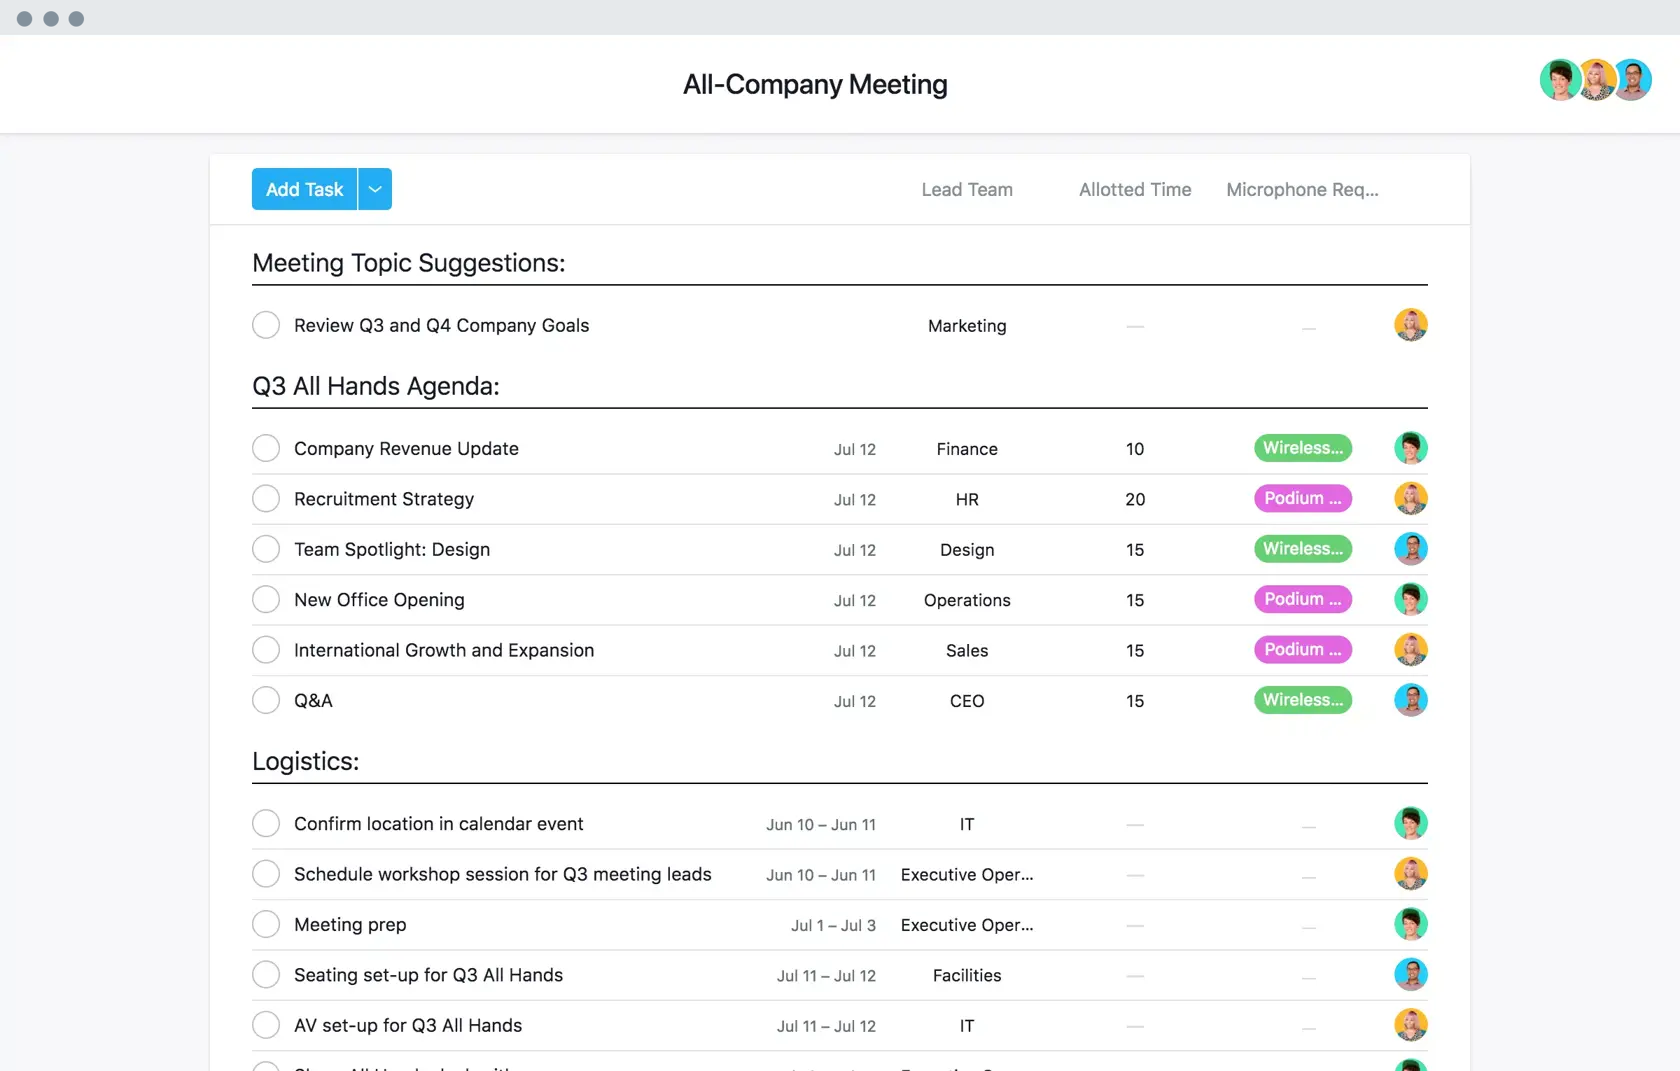 [Old product ui] All company meeting agenda planning template in Asana, spreadsheet-style project view (List)